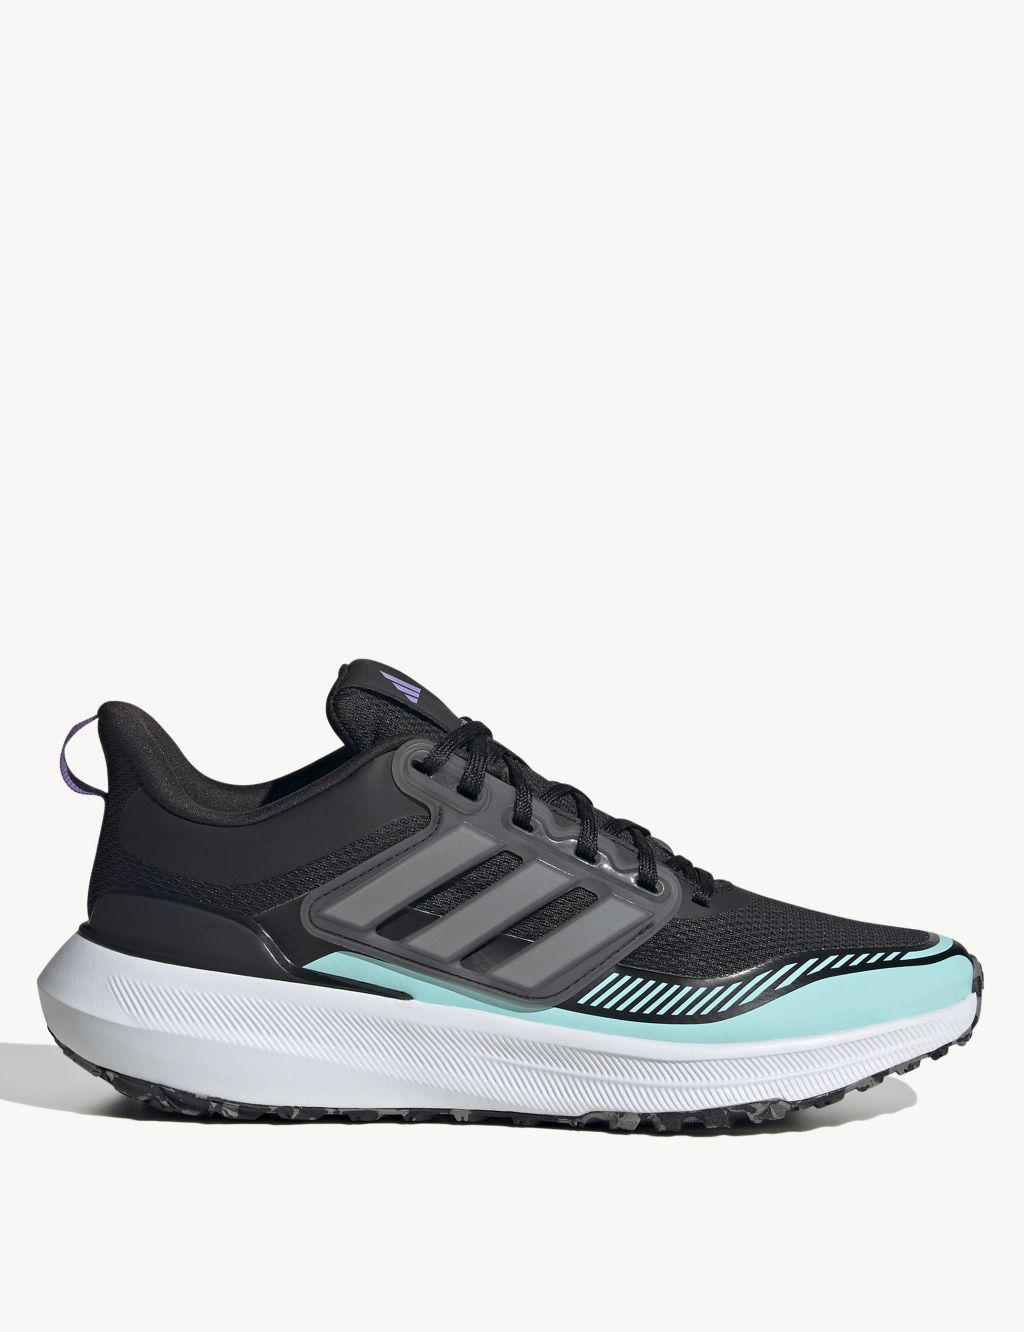 Ultrabounce Running Trainers image 1